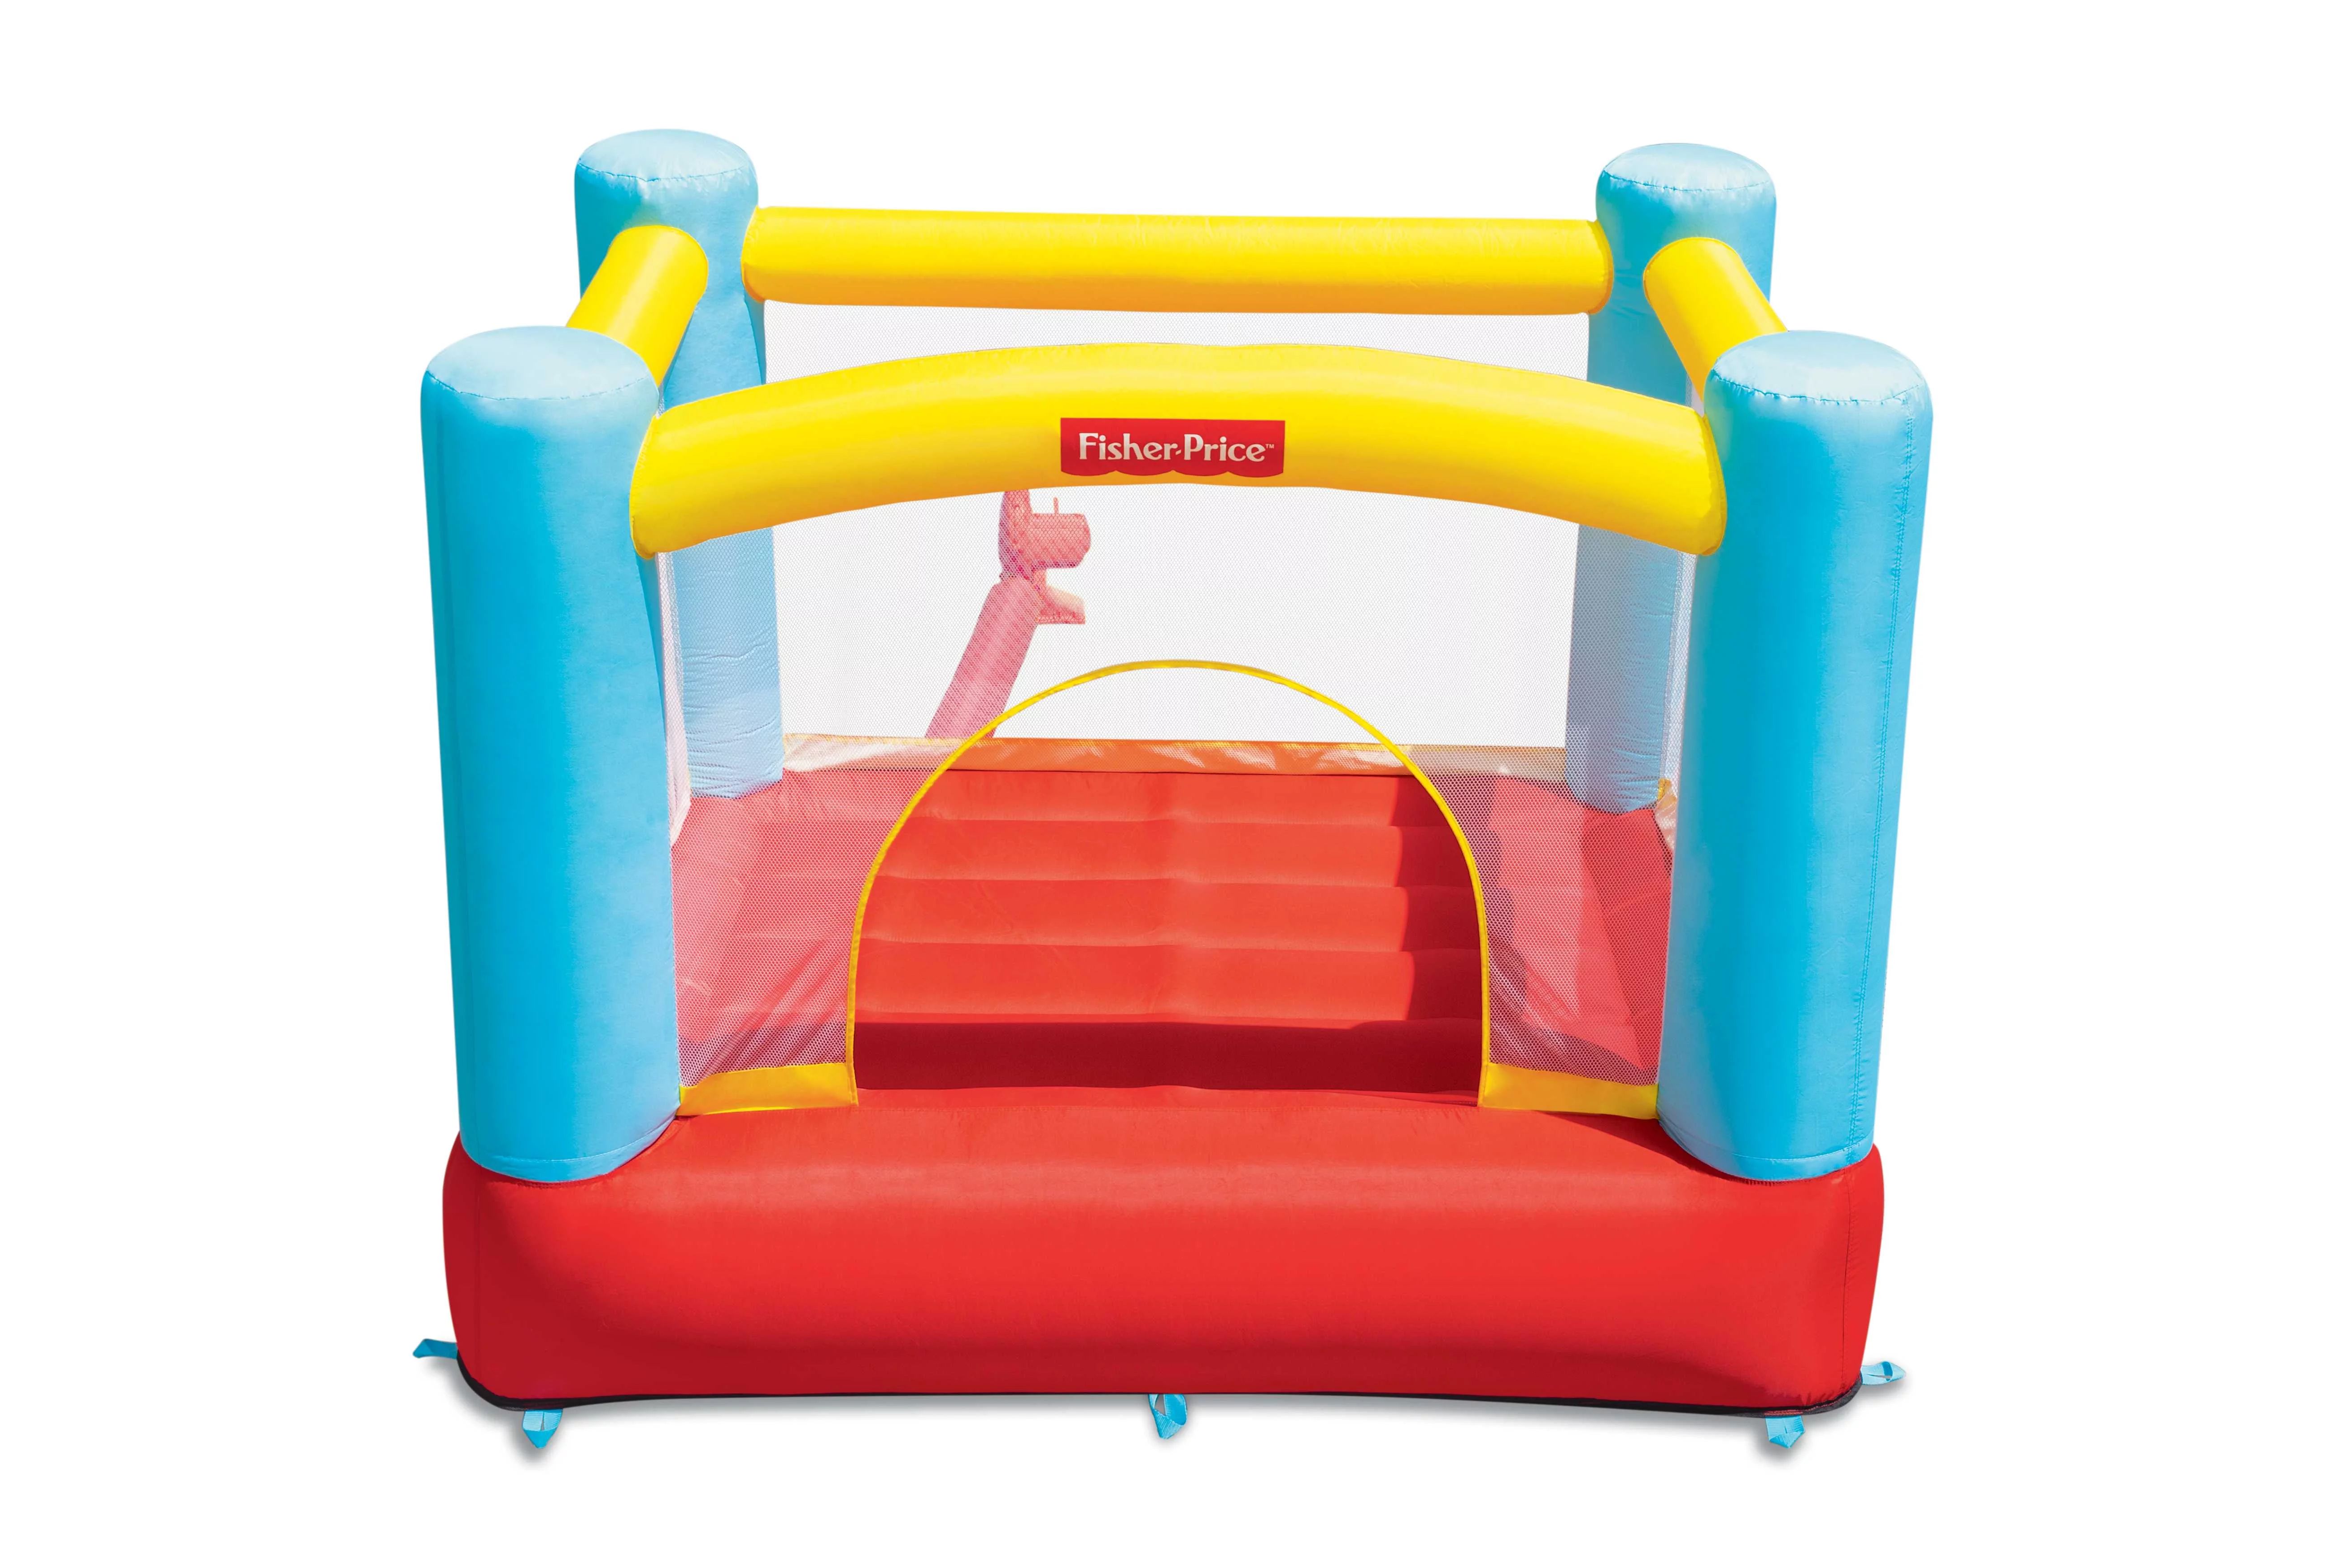 Bestway - Fisher Price Bouncetacular Inflatable Bounce House, Ages 3 and up | Walmart (US)